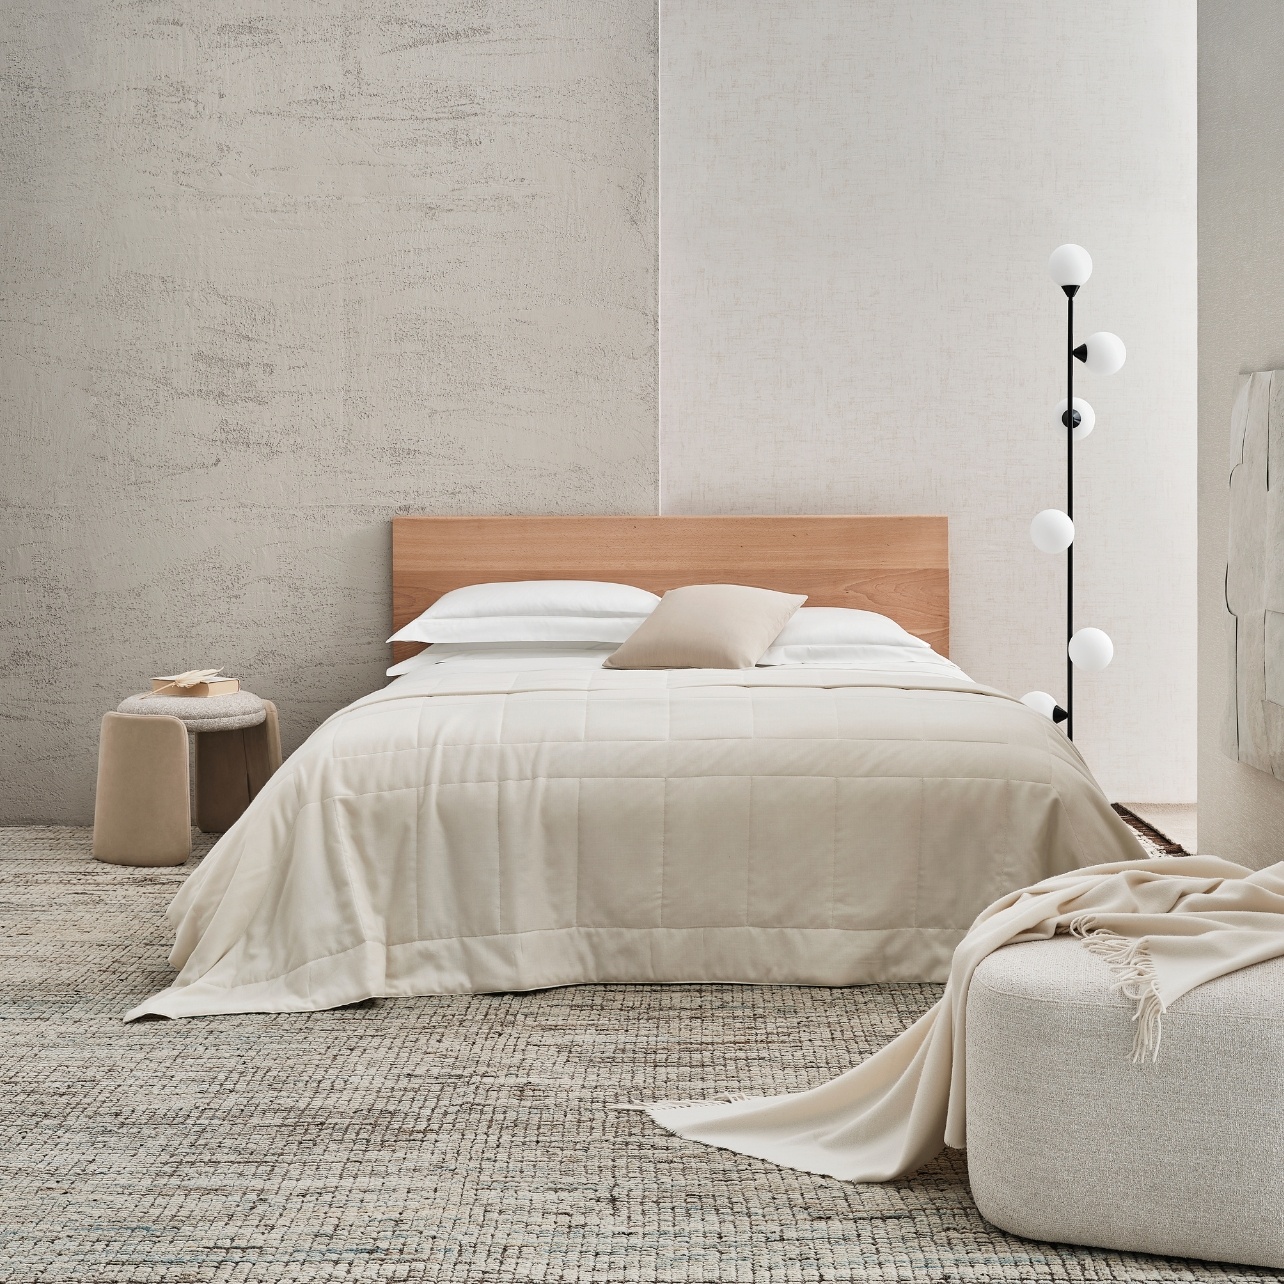 Image showcasing Frette bed linens and pillows in neutral tones